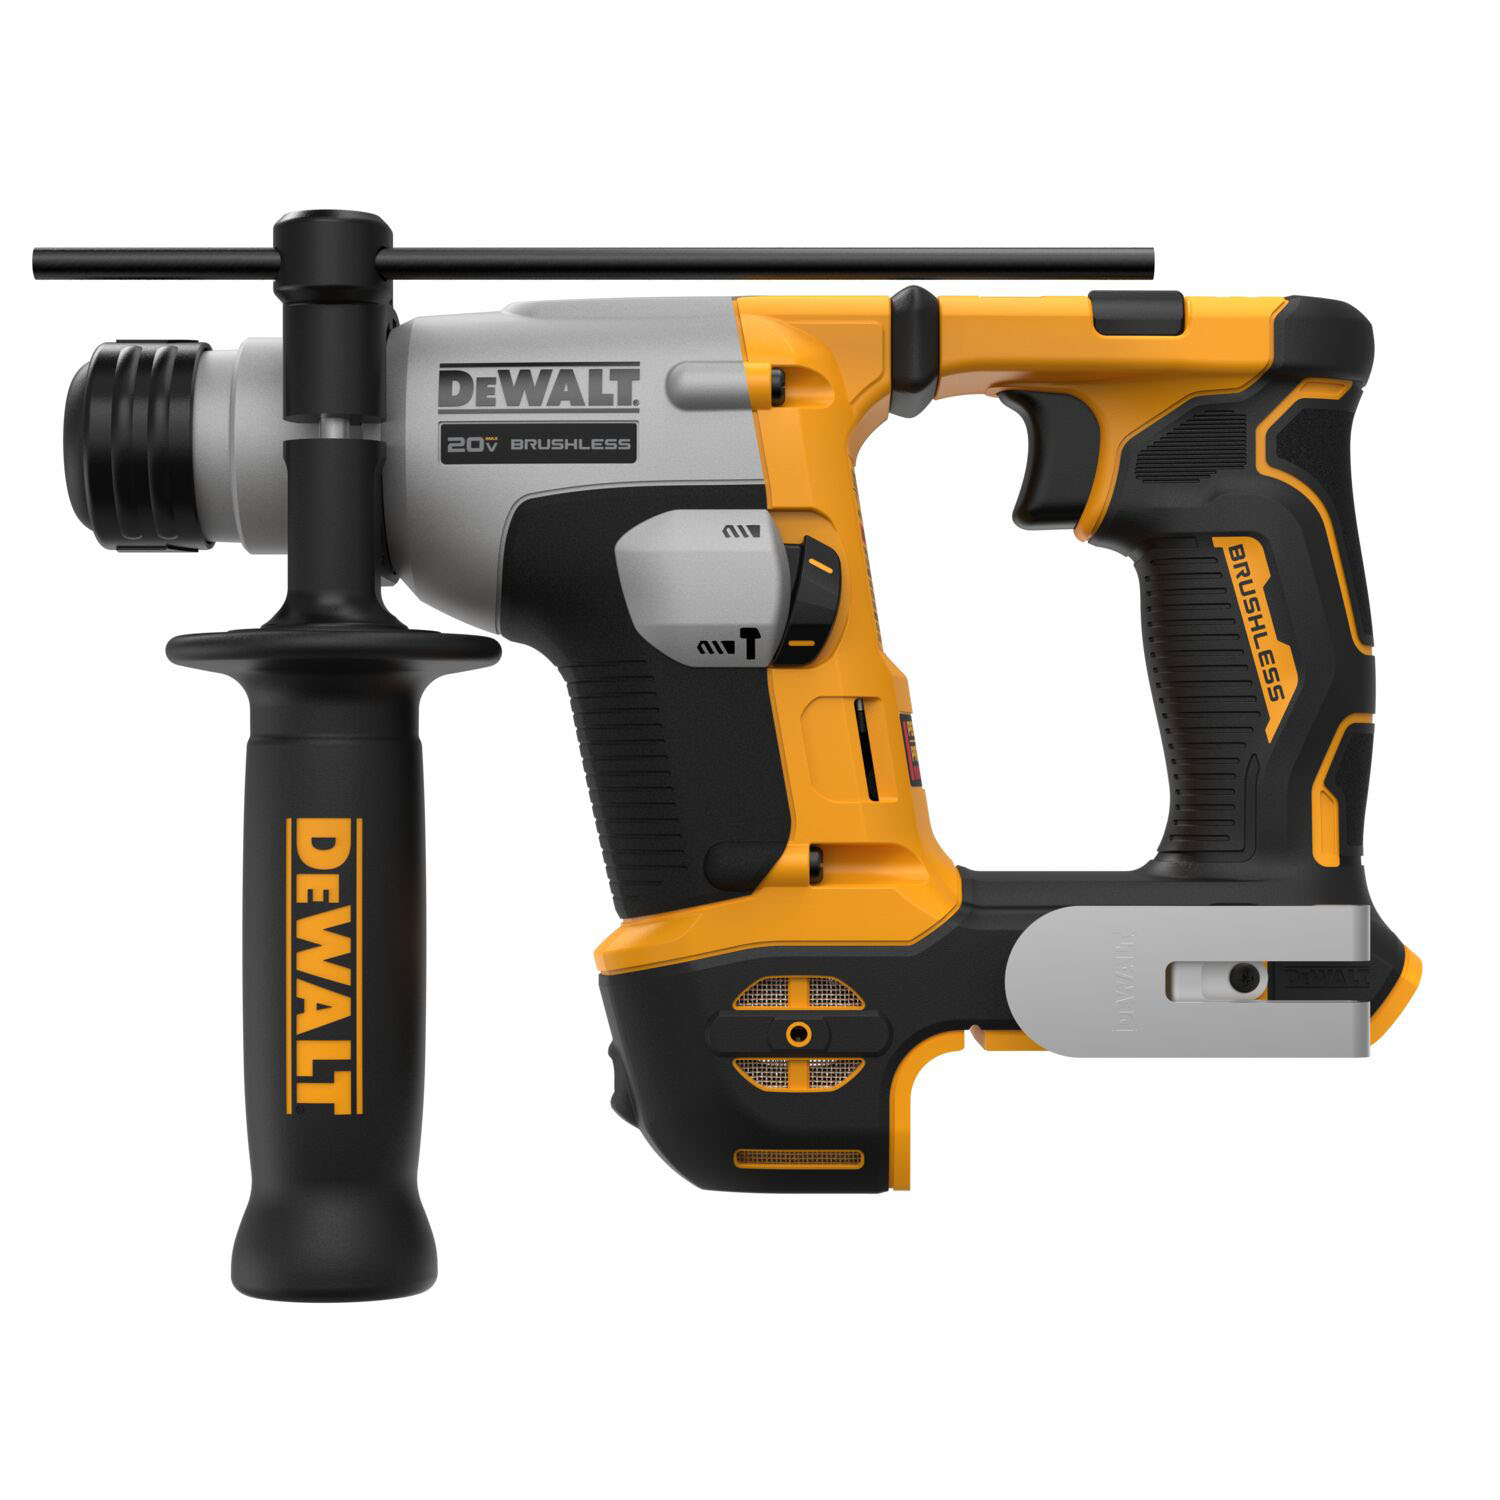 ATOMIC 20V MAX 5/8 IN. BRUSHLESS CORDLESS SDS PLUS ROTARY HAMMER (TOOL ONLY)